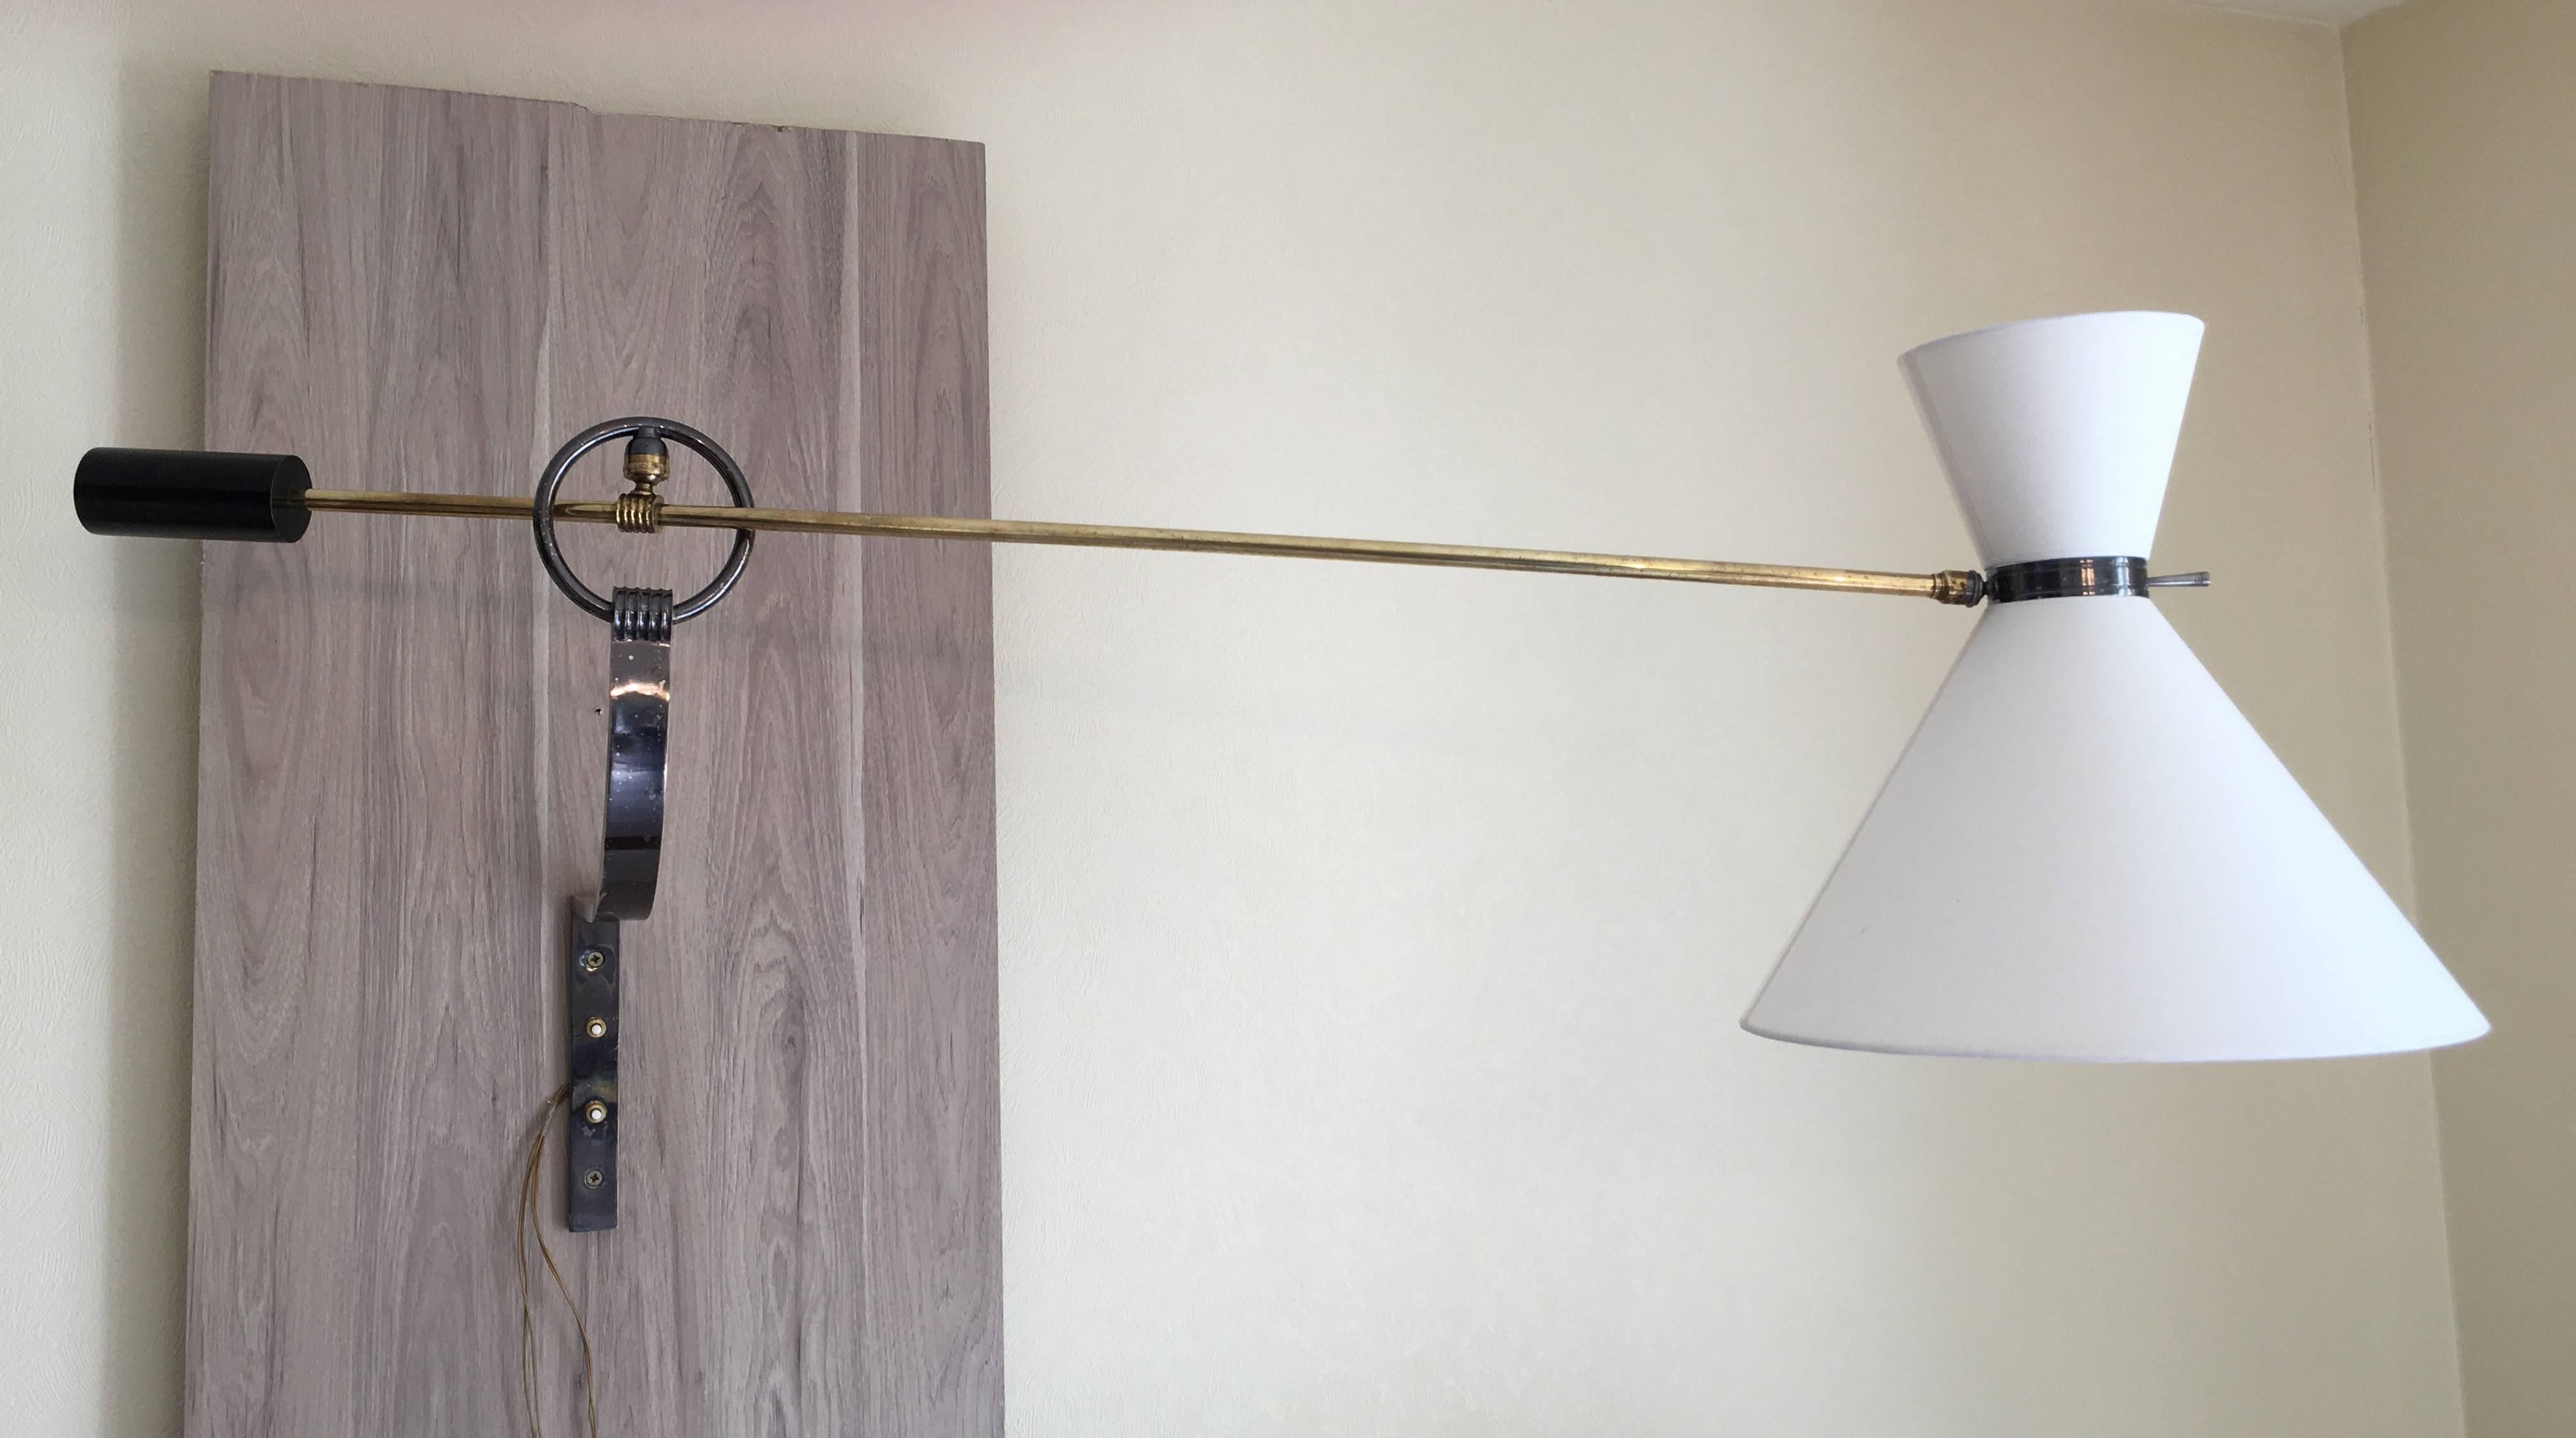 French counterbalance wall sconce designed by René Mathieu and edited by Lunel in 1950s
Massive gunmetal bronze bracket supports a ring. Two ball joint systems and a counterweight allow to adjust the brass long arm and the diabolo shades.
In perfect